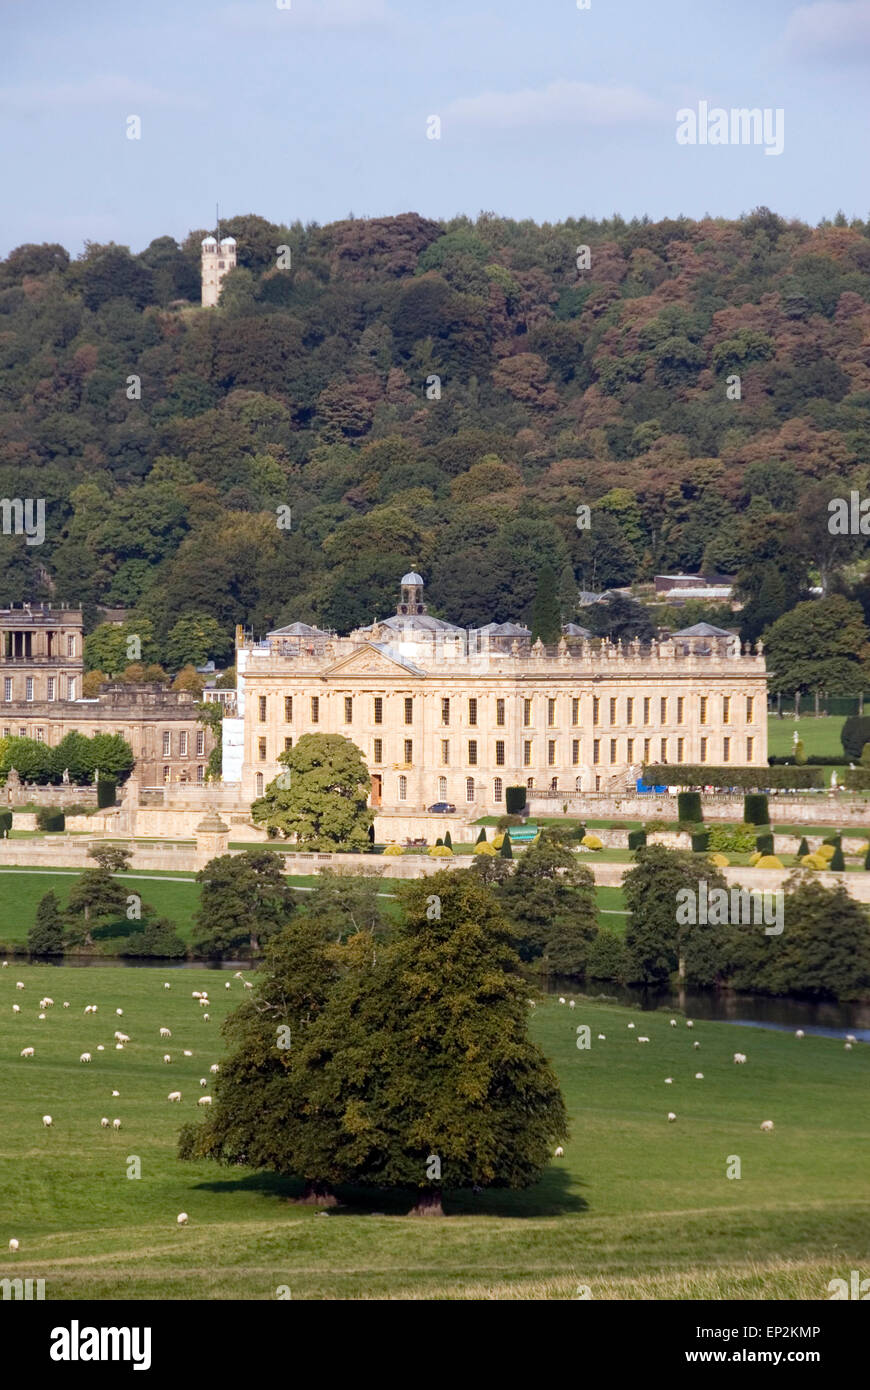 Chatsworth House stands amids beautiful parkland in the Derwent Valley, Derbyshire UK Stock Photo